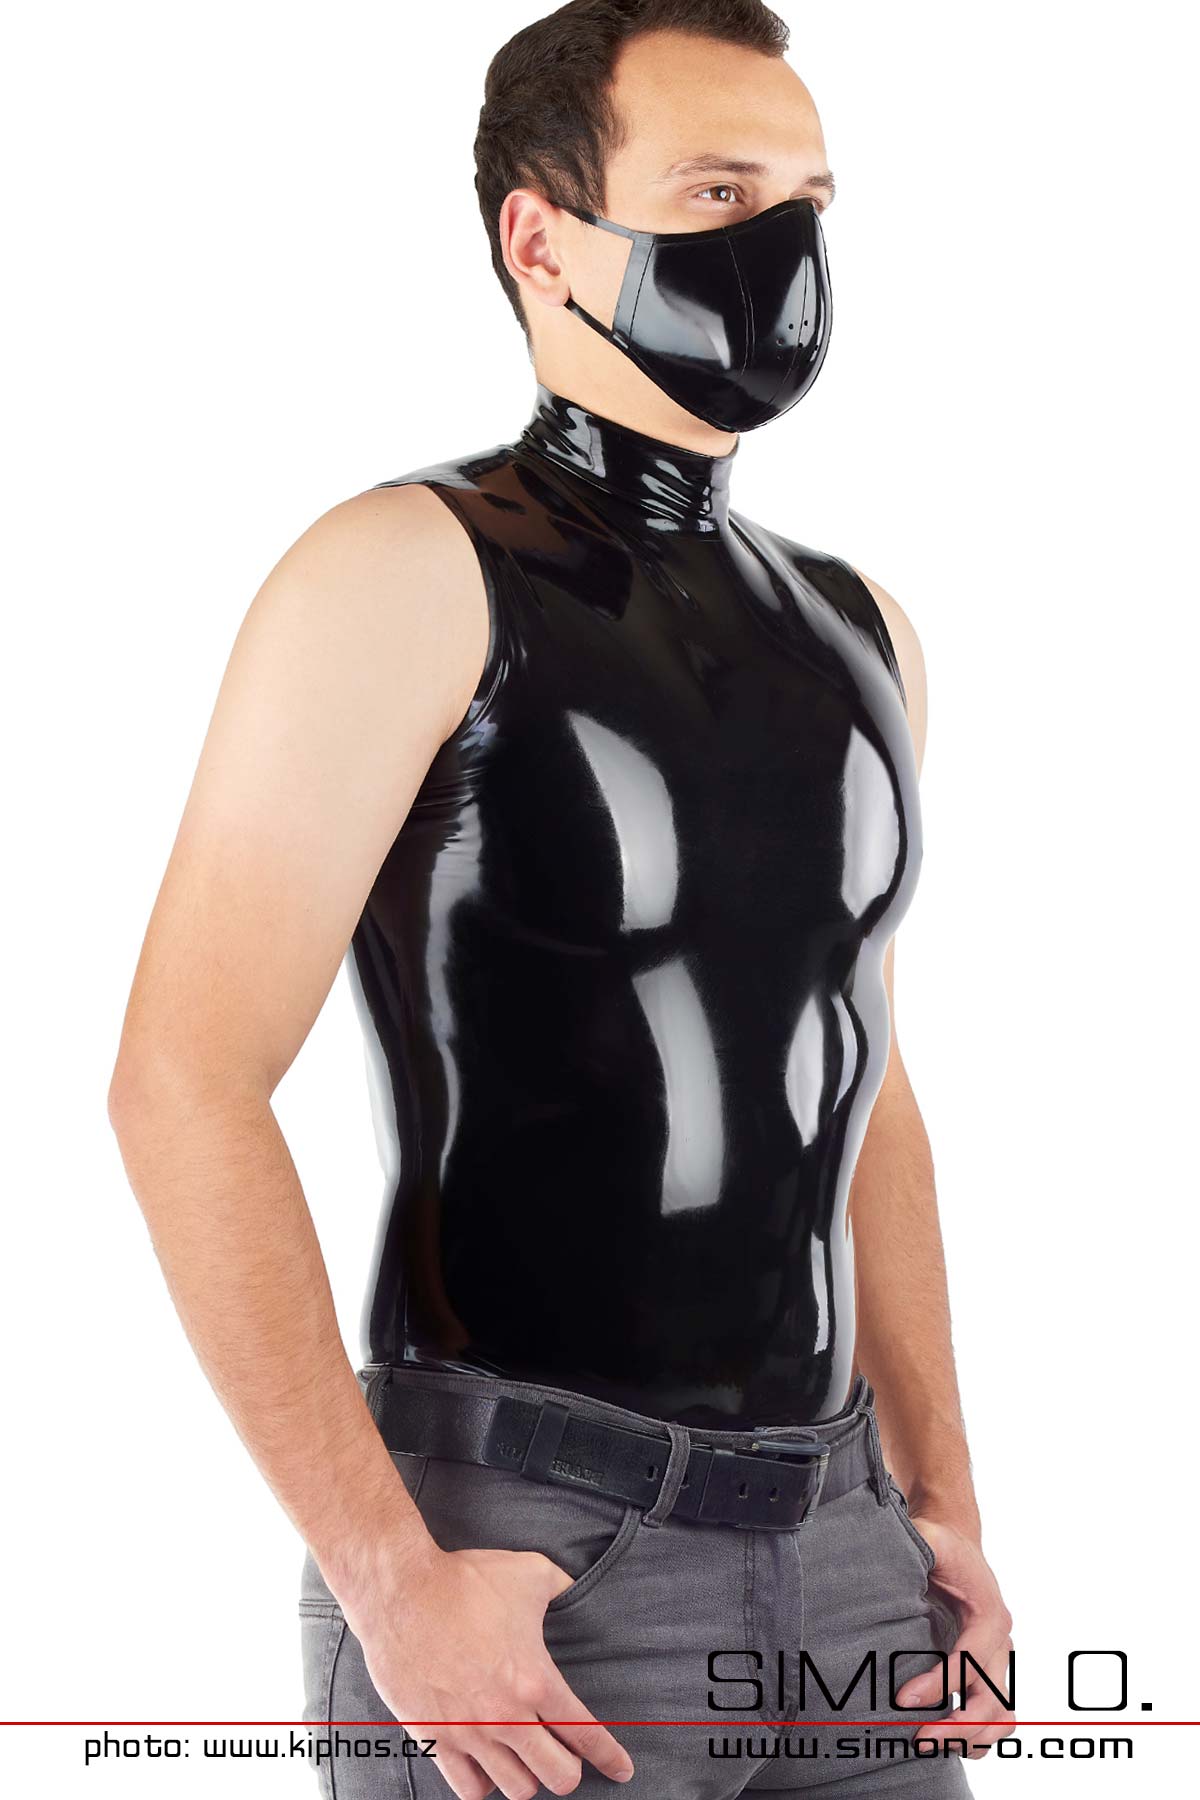 A man wears a tight sleeveless latex shirt in black with stand-up collar - seen from behind.